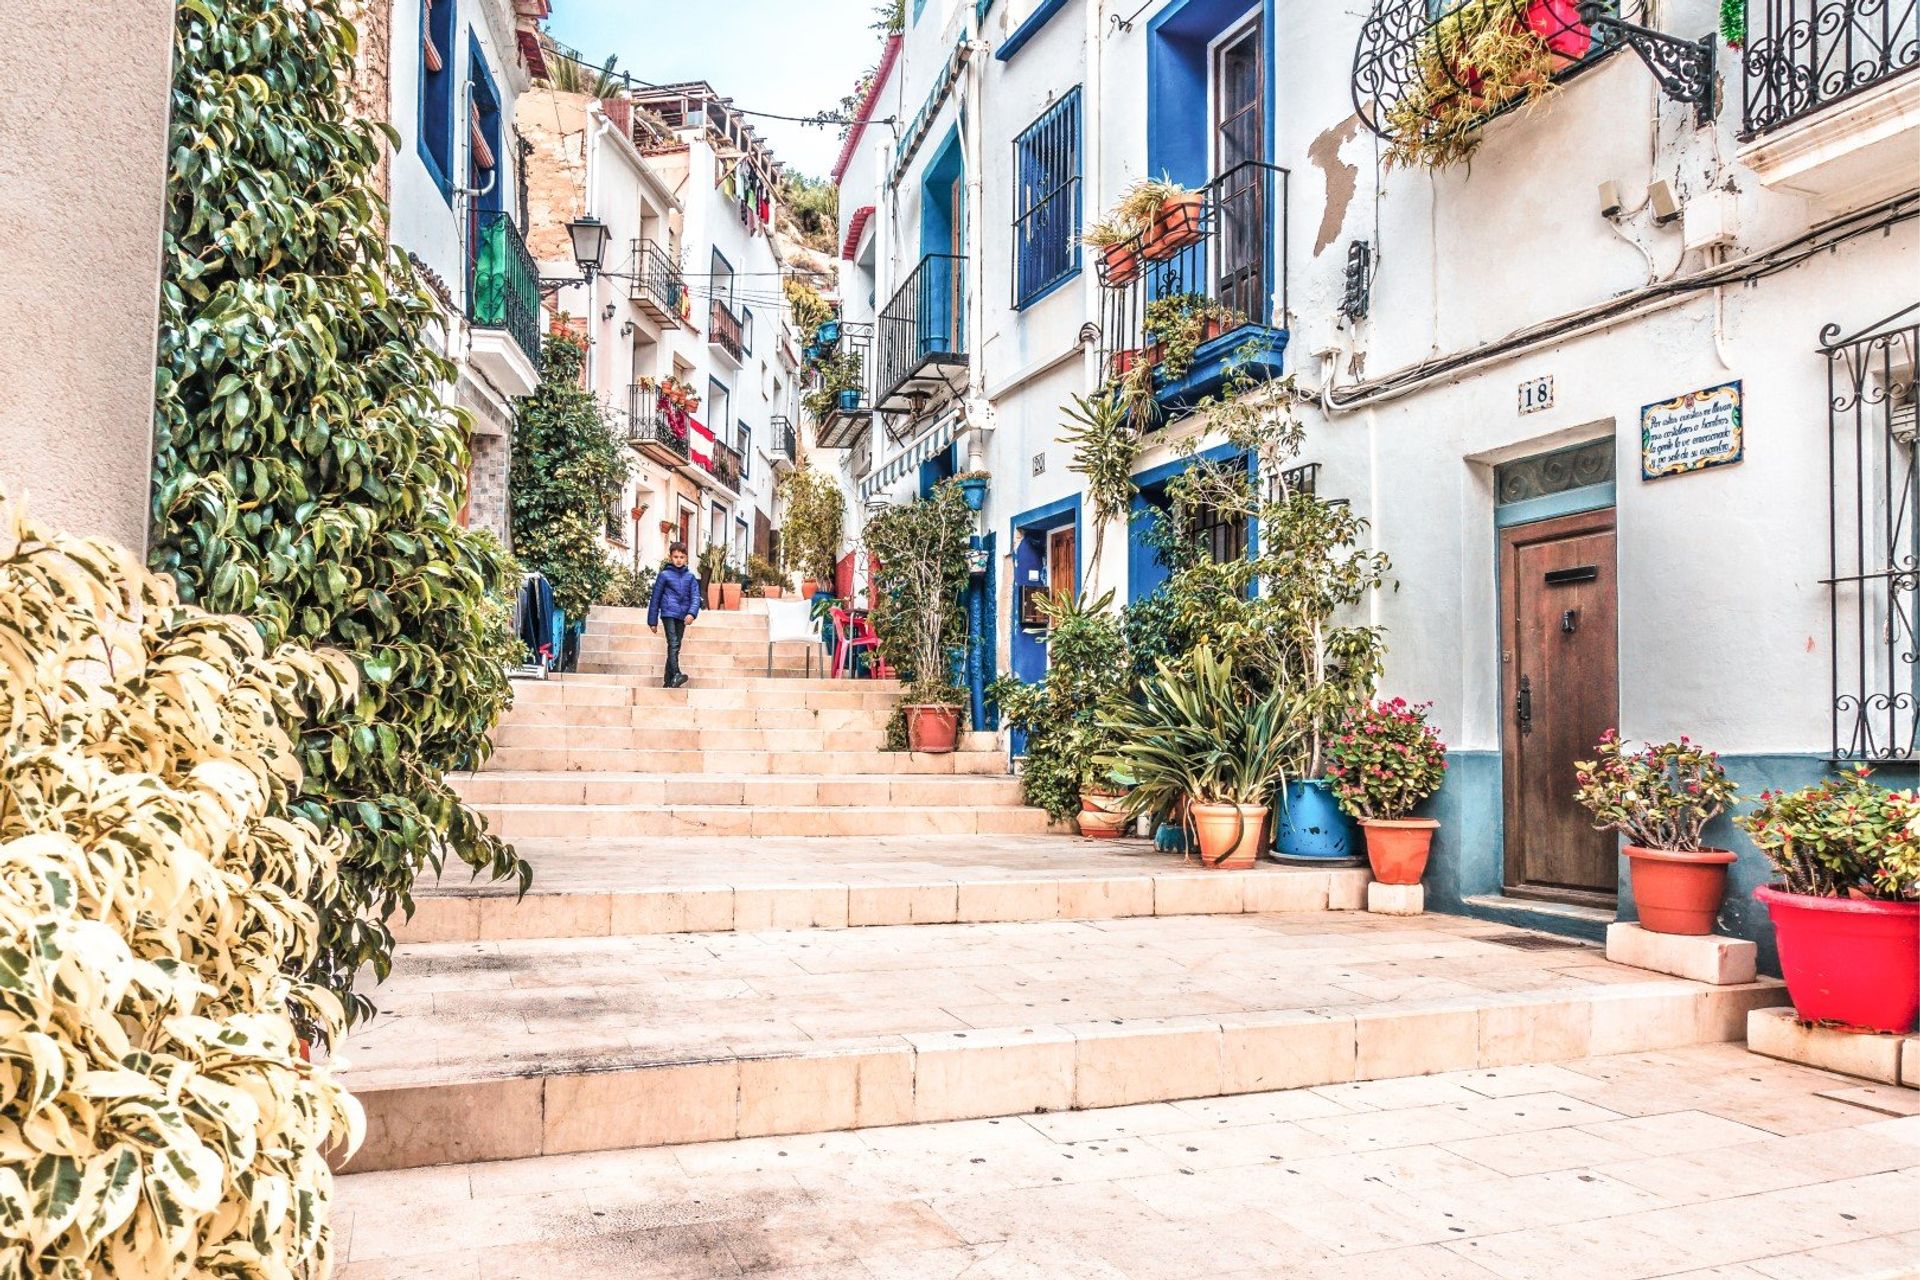 An old and winding street in Alicante City's charming old town